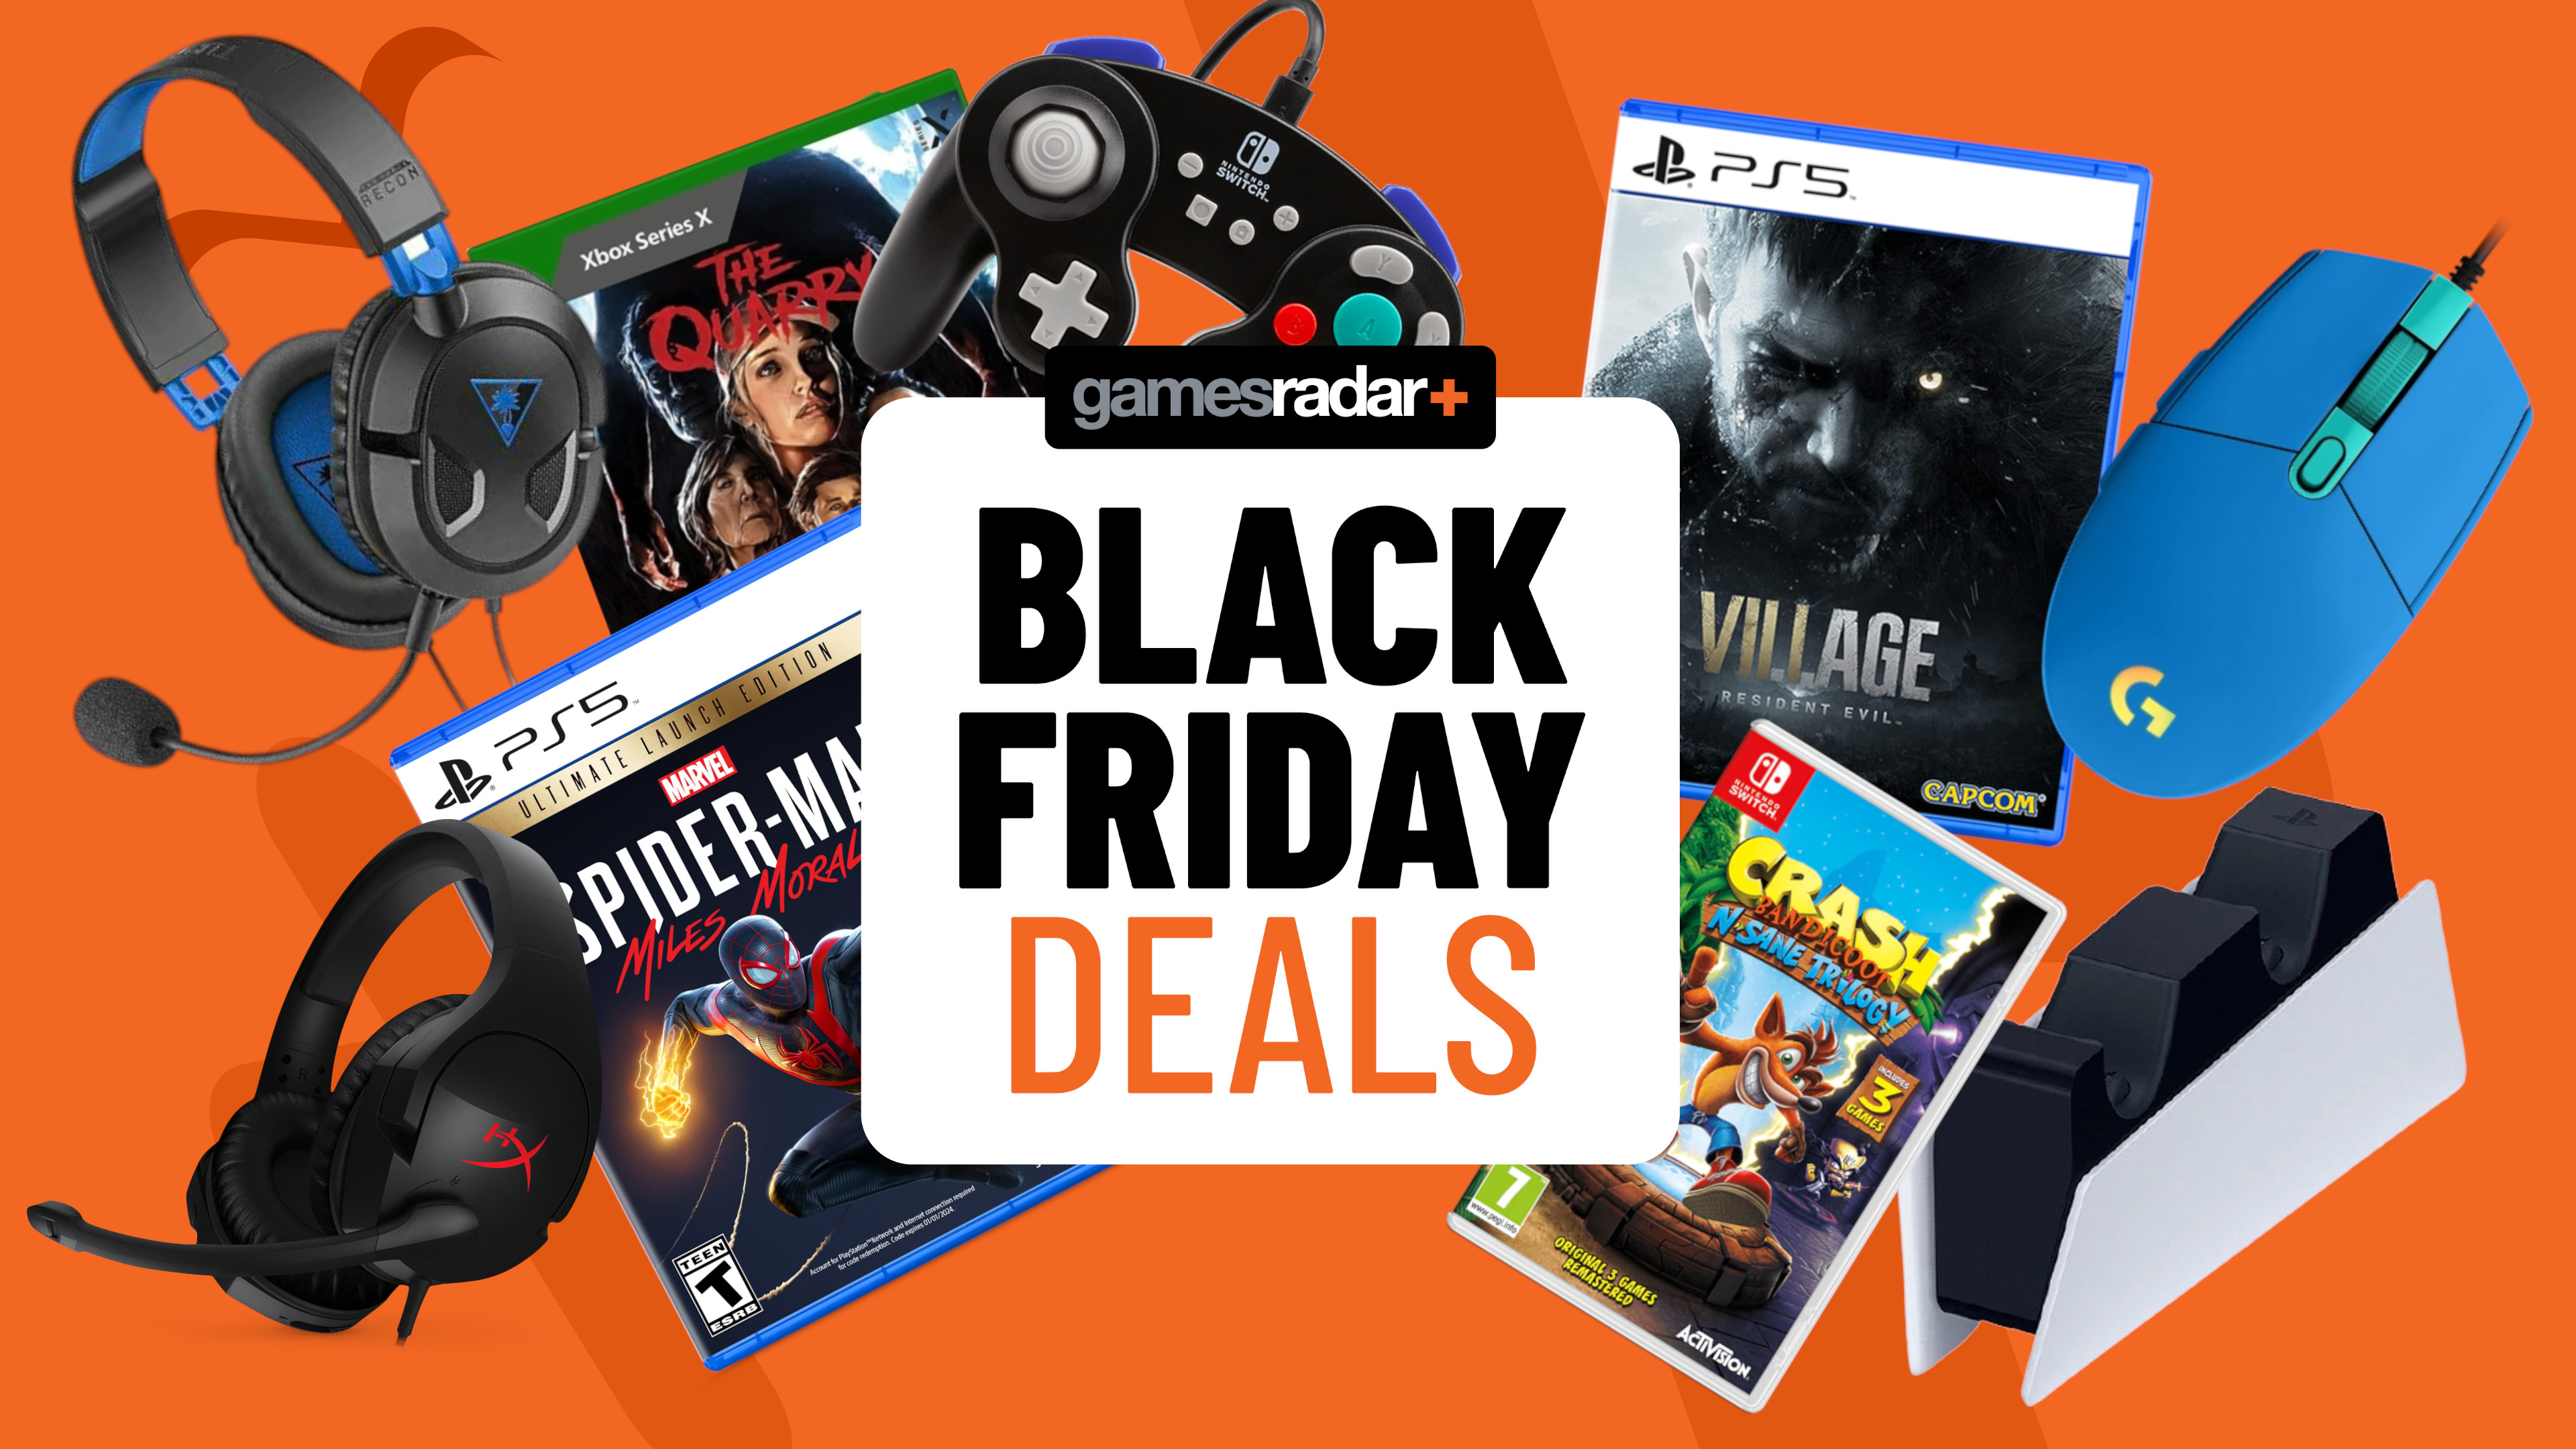 Black Friday Gaming Deals: Save Big on Nintendo and PS5 Bundles, Laptops,  and More